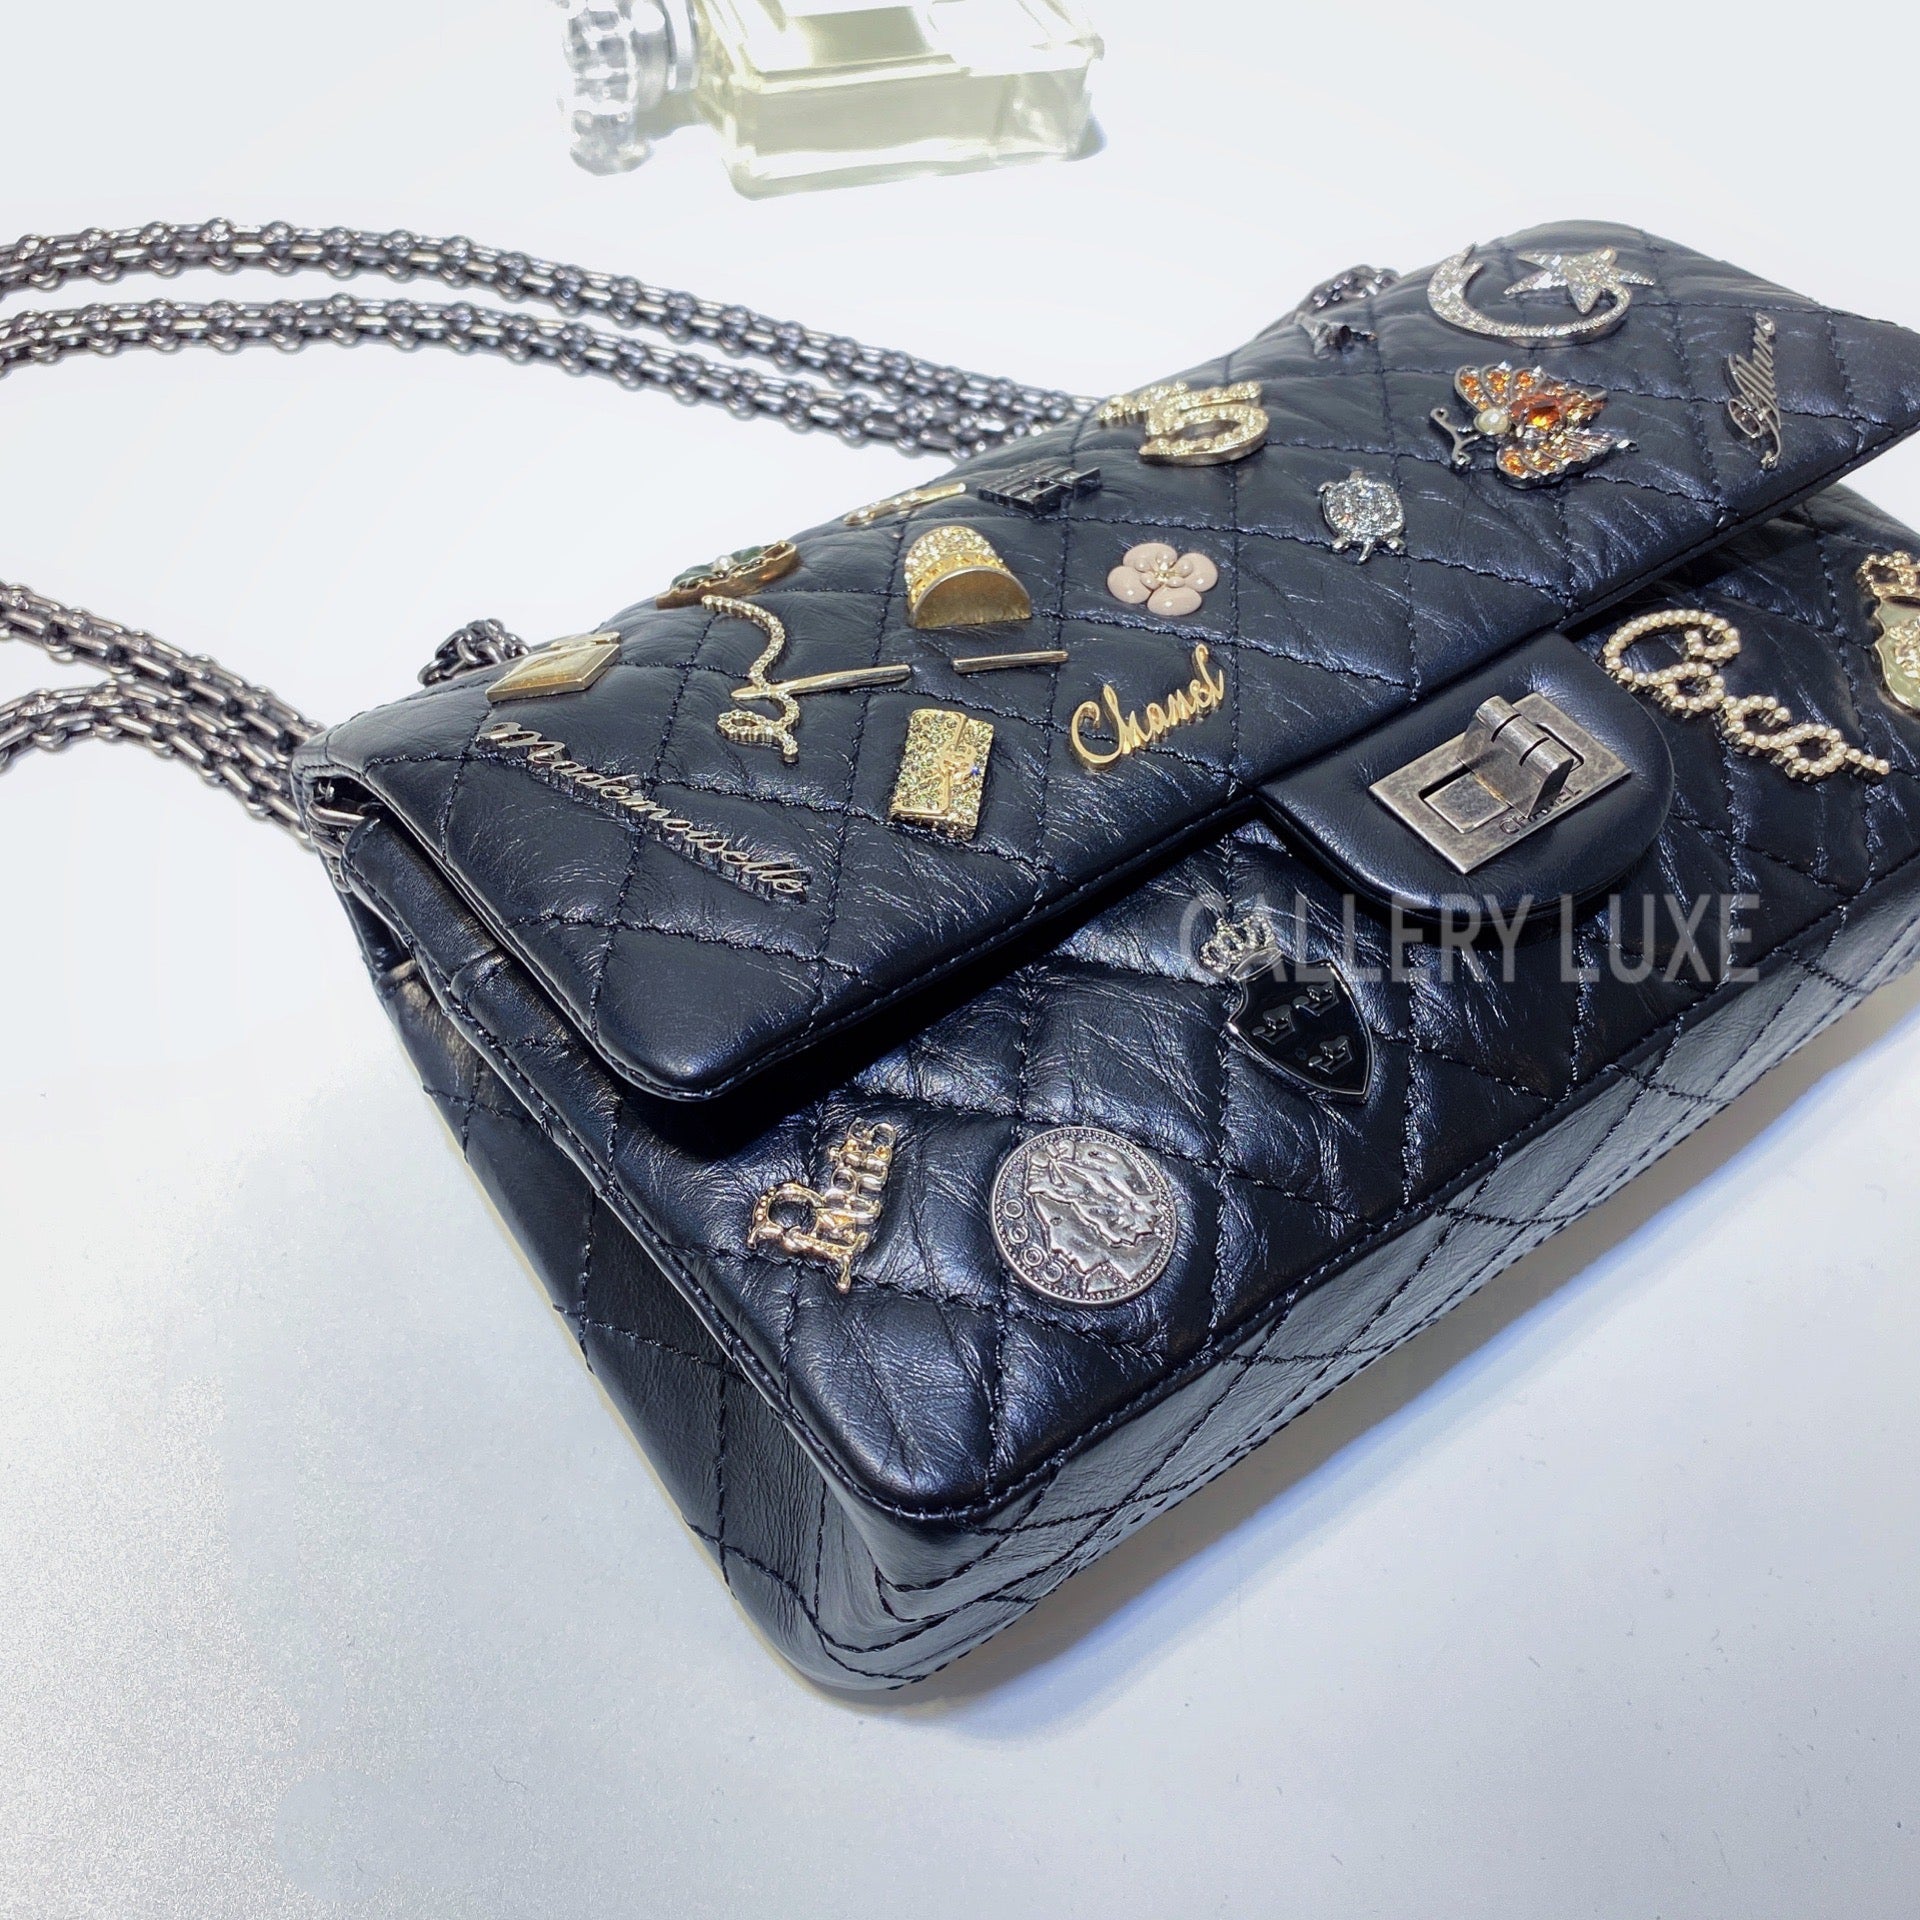 Chanel  255 Reissue Flap Bag  Lucky Charms Edition  Bagista